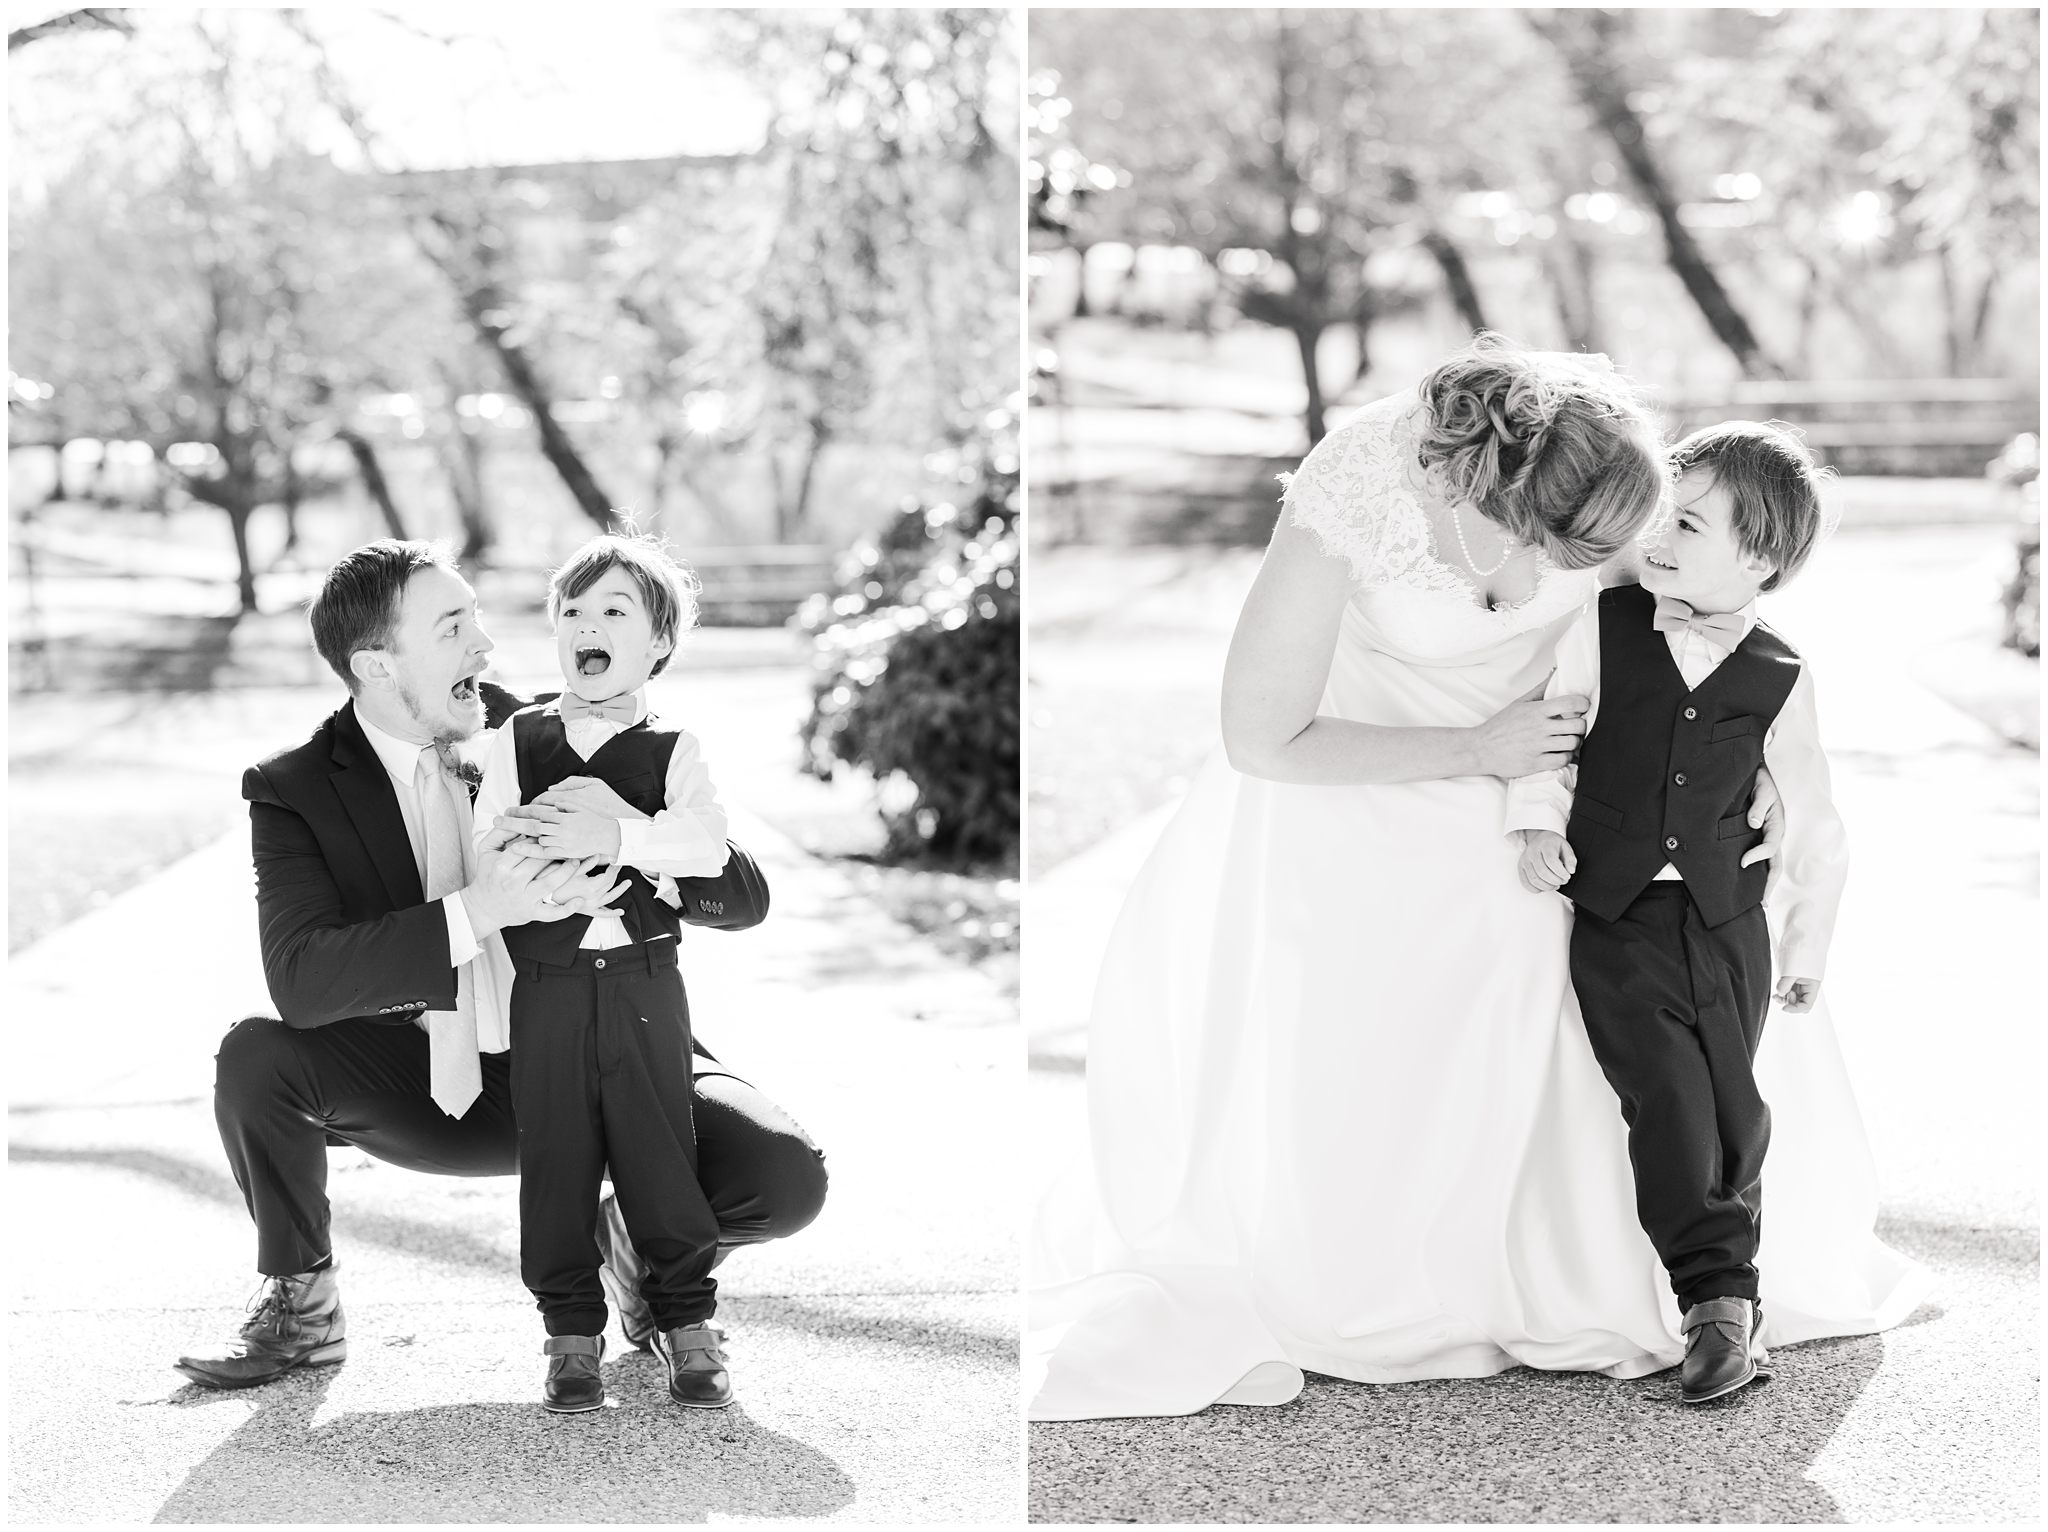 Sarah and Caleb | A Thoughtful & Literary Inspired Winter Wedding Day ...